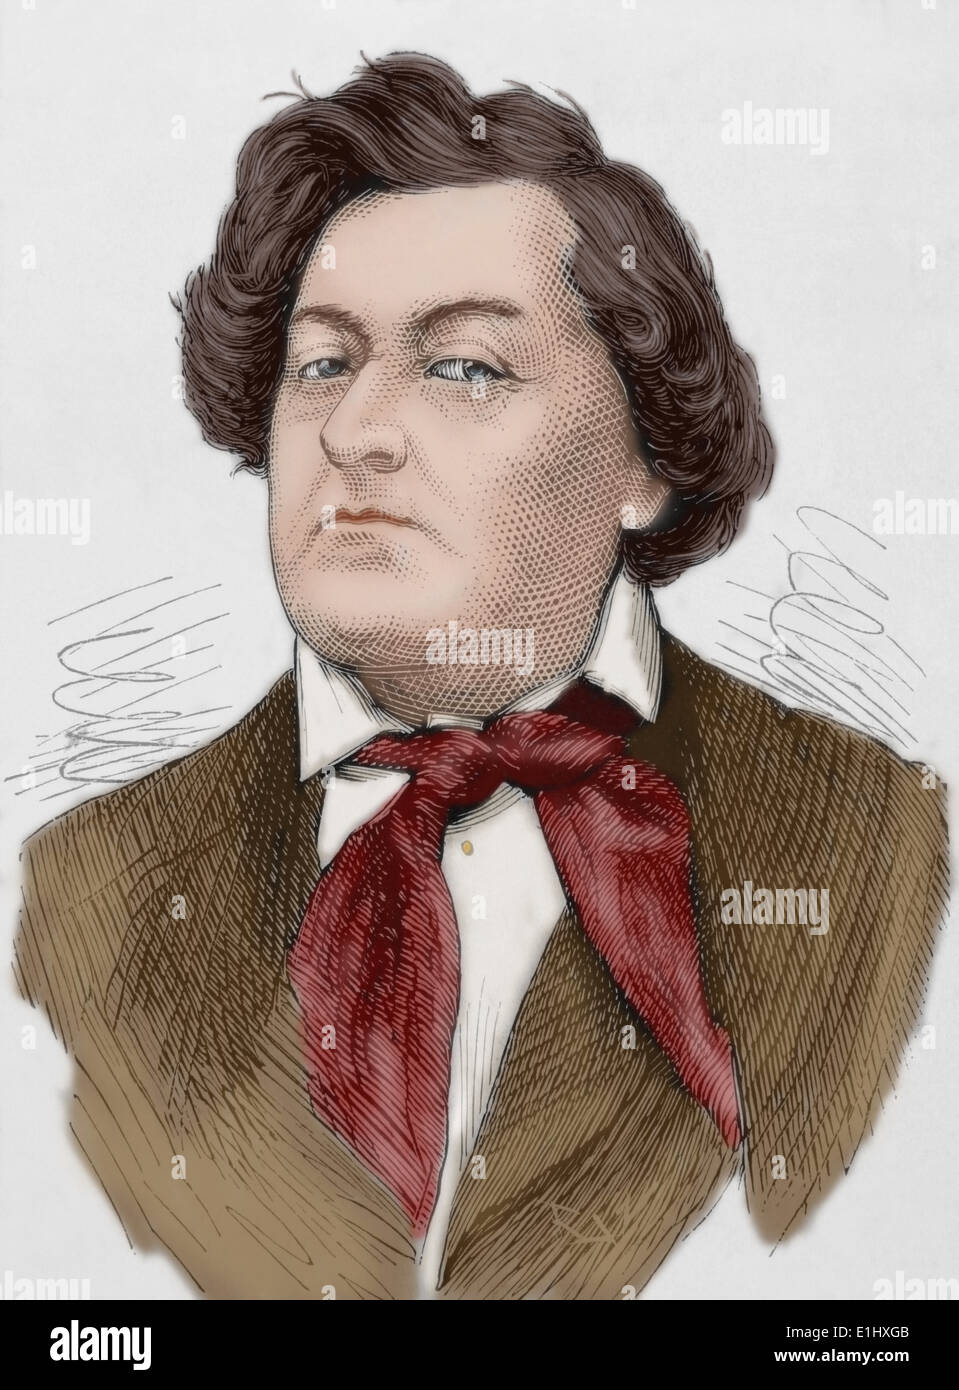 Frederick Lemaitre (1800-1876). French actor. Engraving in The Spanish and American Illustration, 1876. Colored. Stock Photo